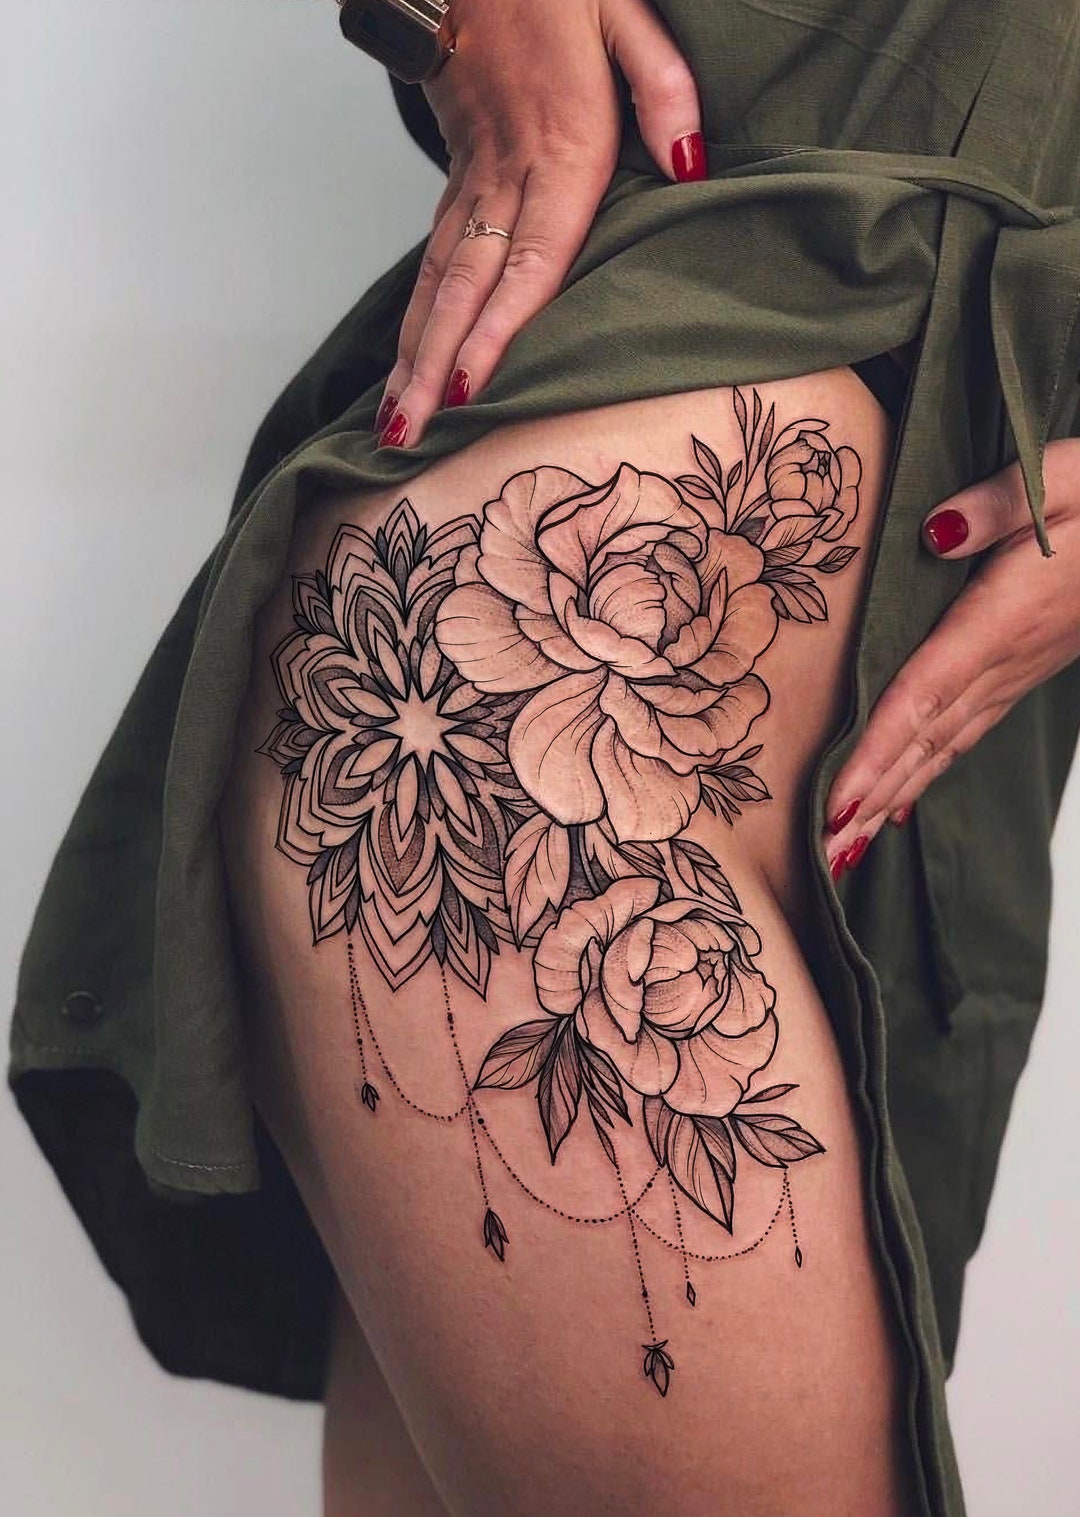 The pattern of curved lines appears almost animated, giving this flower  mandala tattoo a lively appeal | Ratta Tattoo